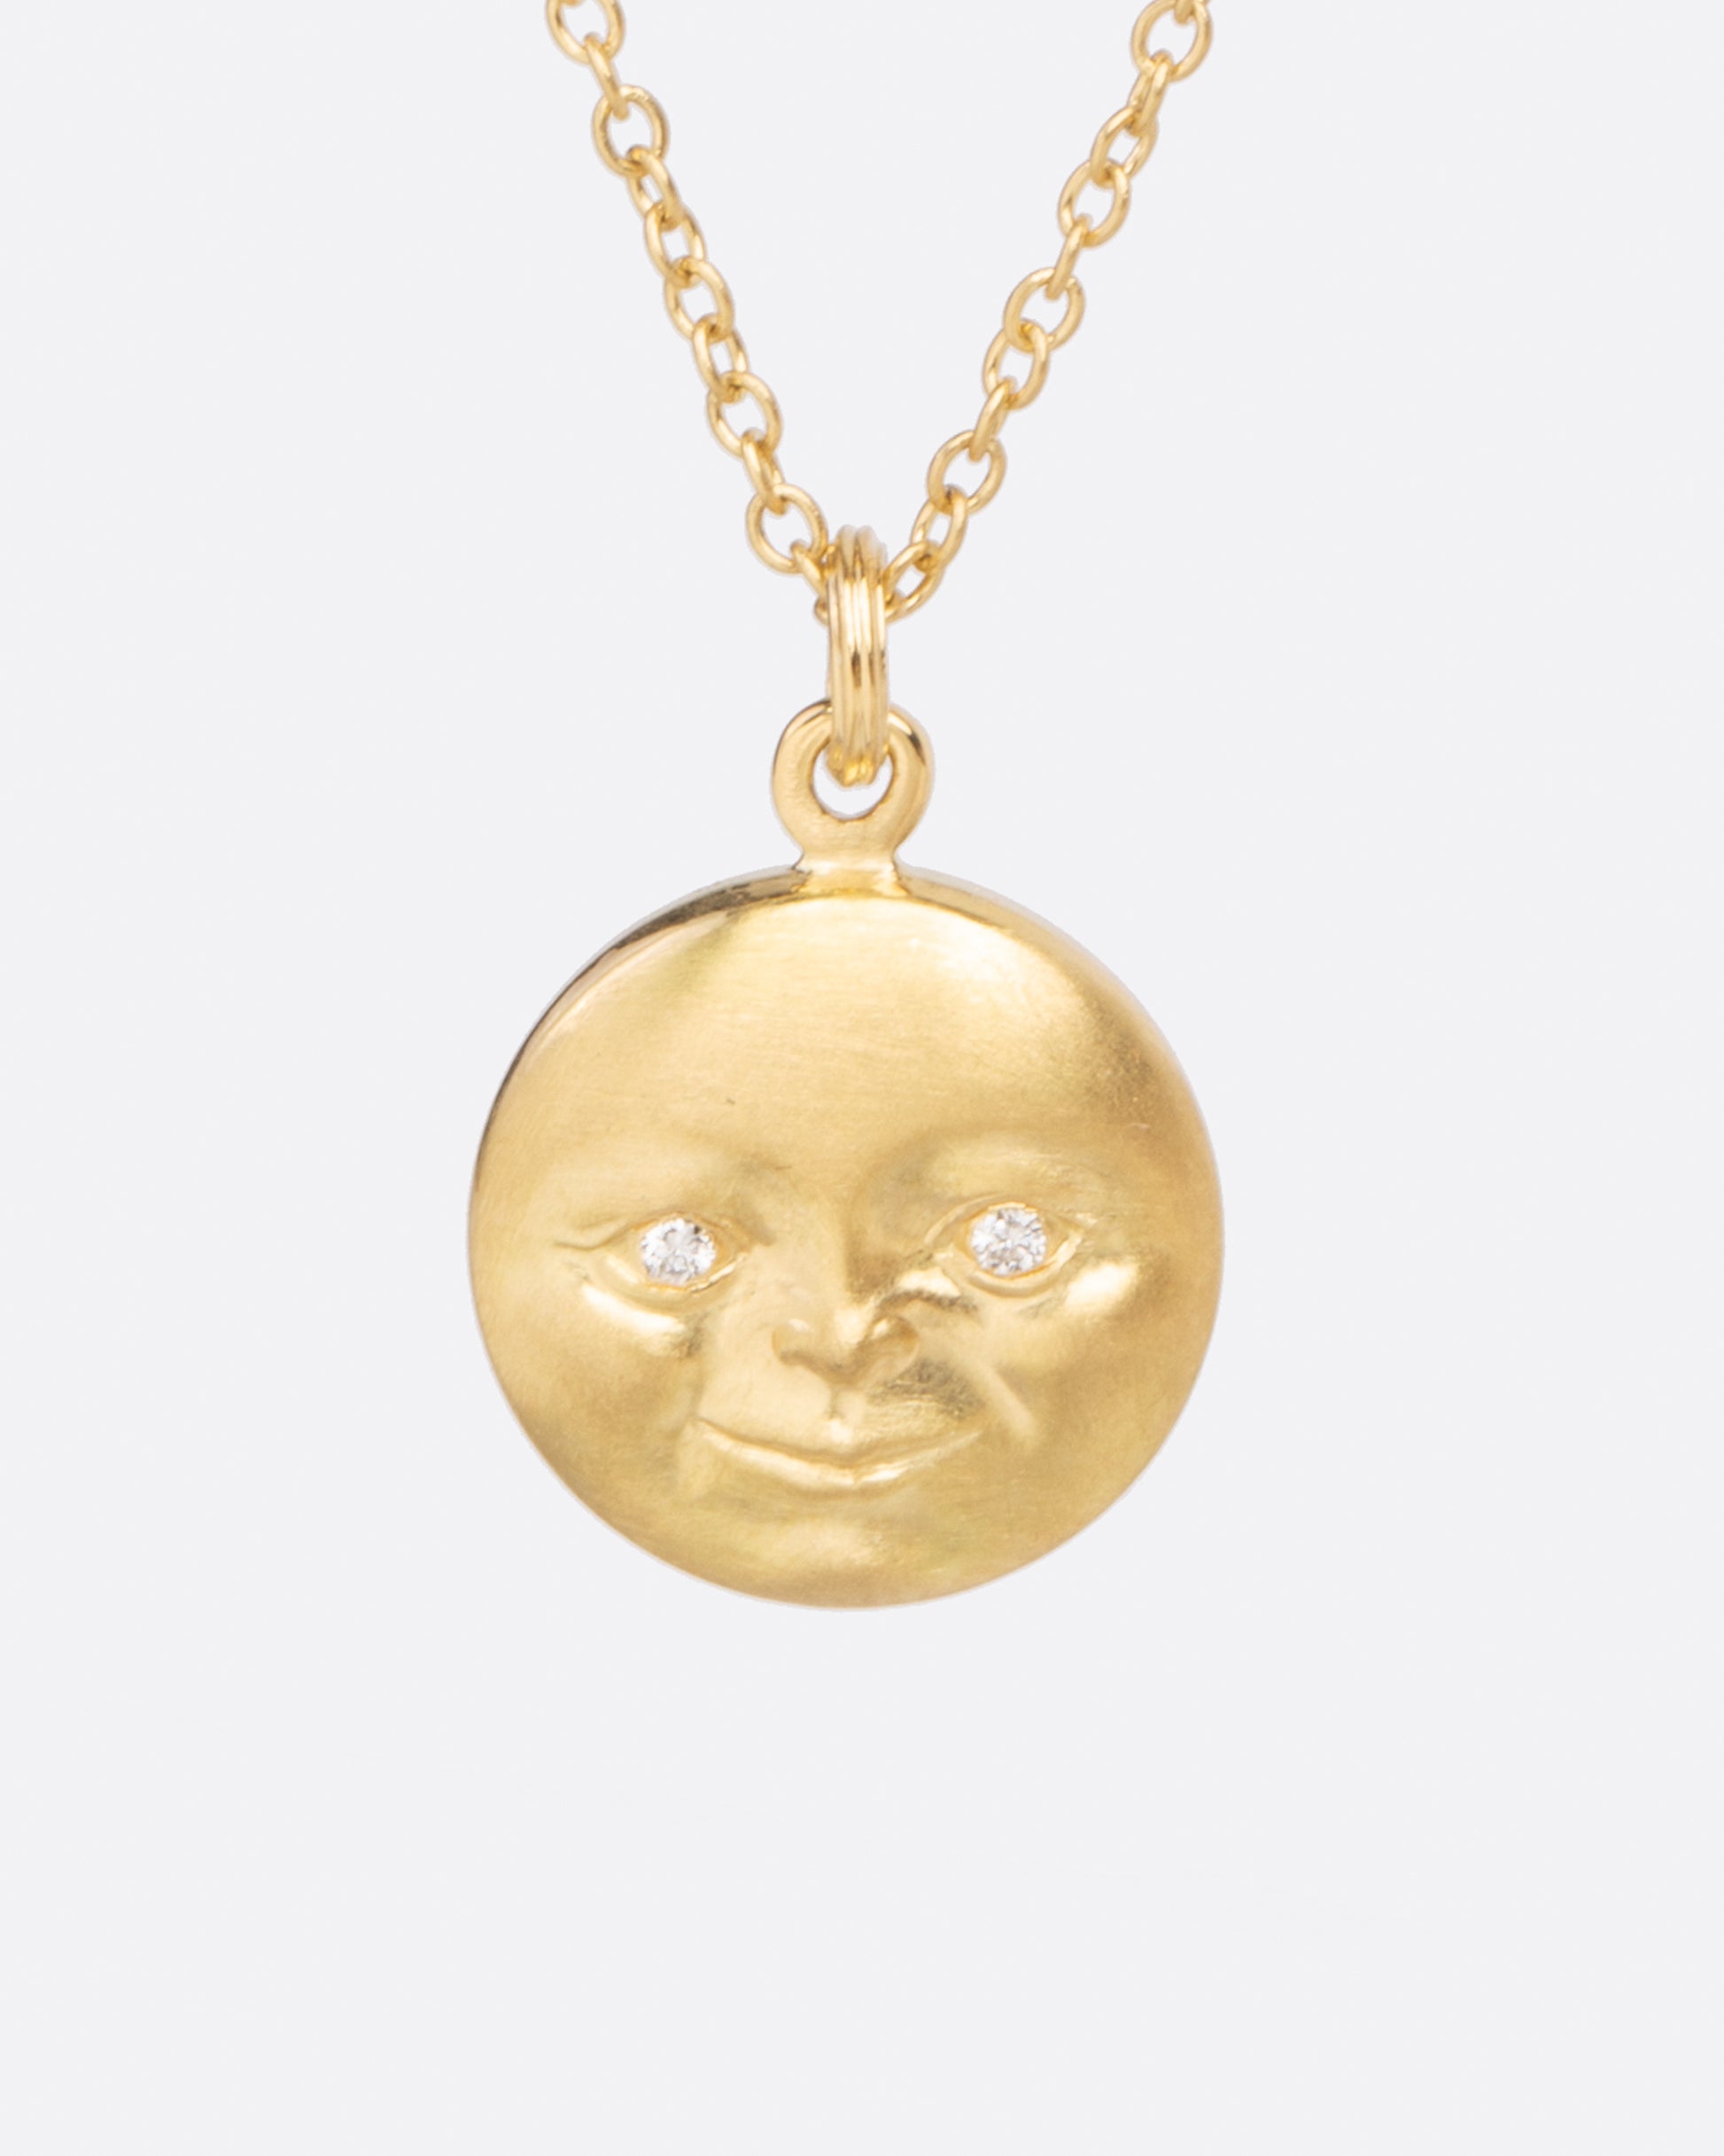 A highly detailed moonface with little diamonds eyes hangs from a sturdy chain.